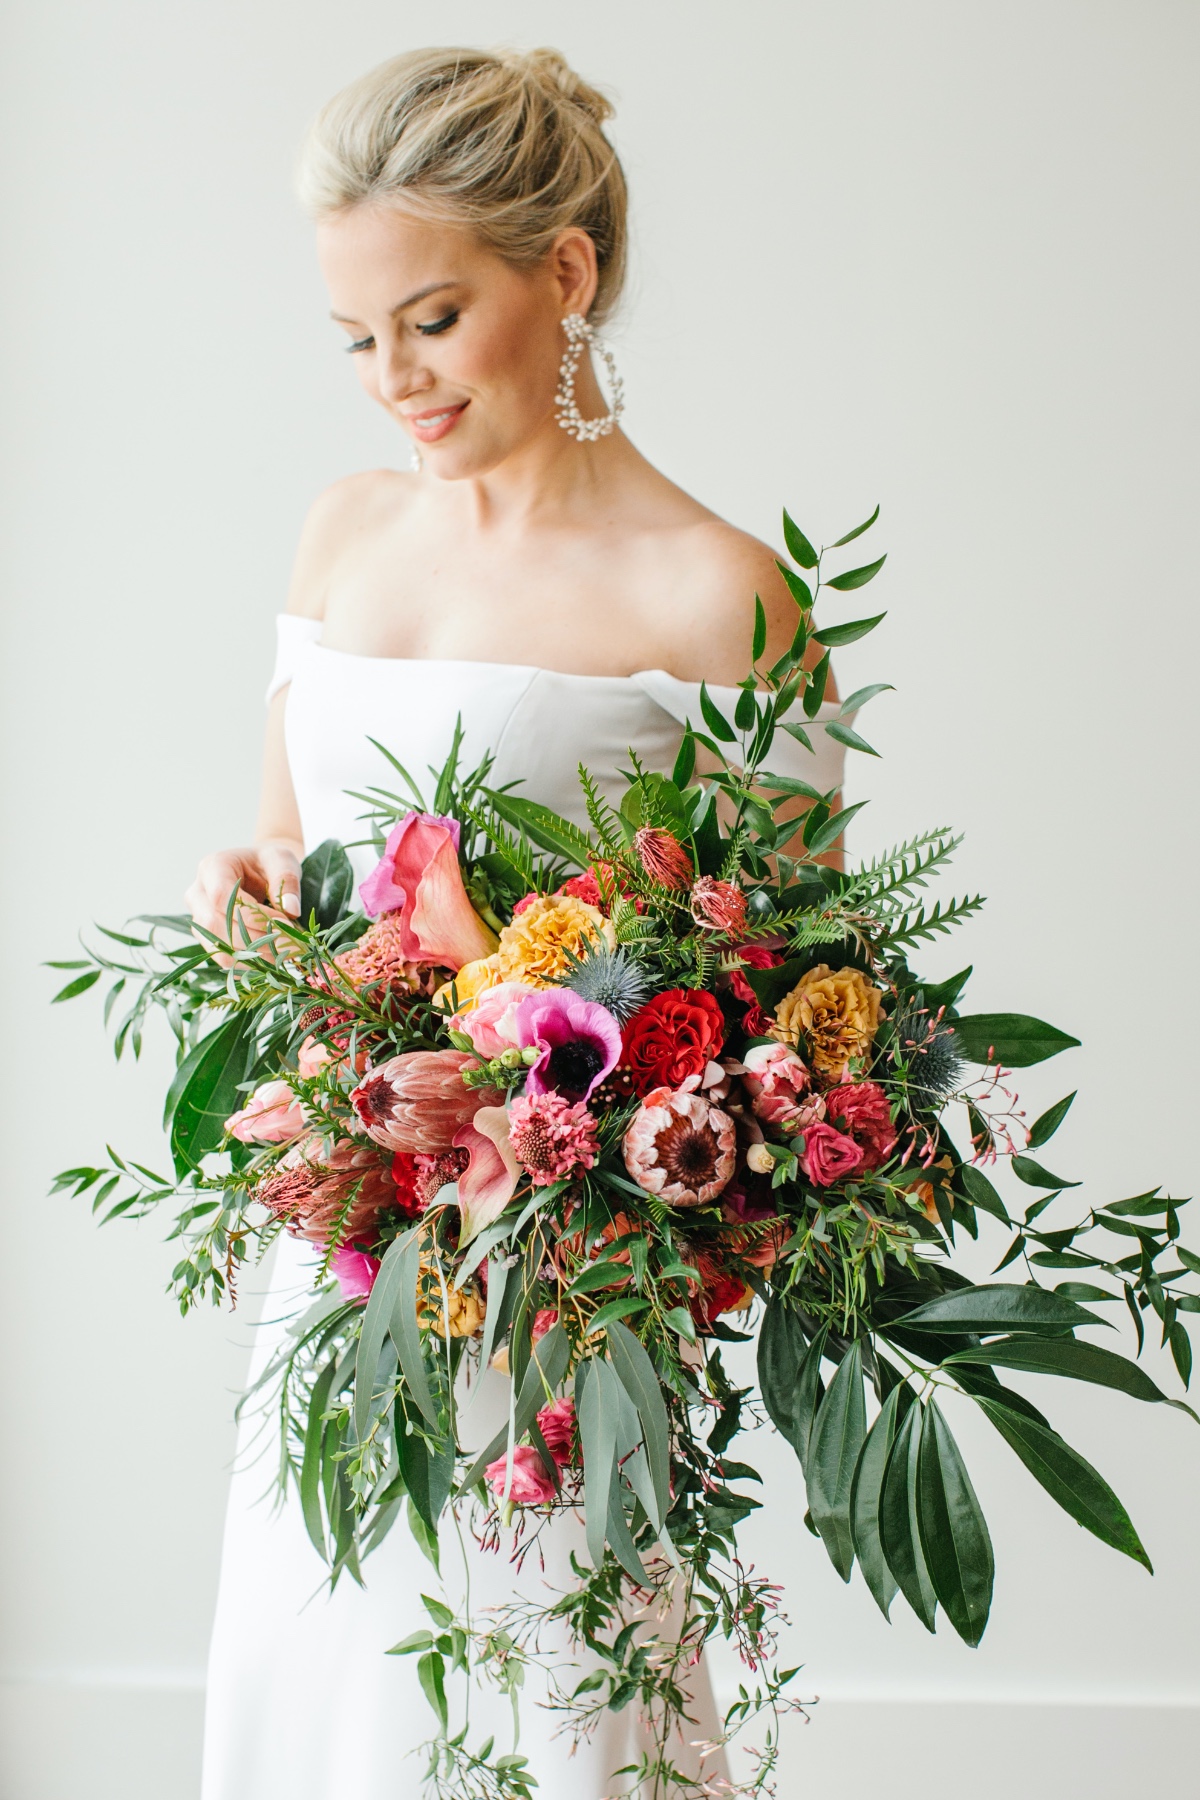 lose wedding bouquet with protea, pink anemone, greenery and tropical florals